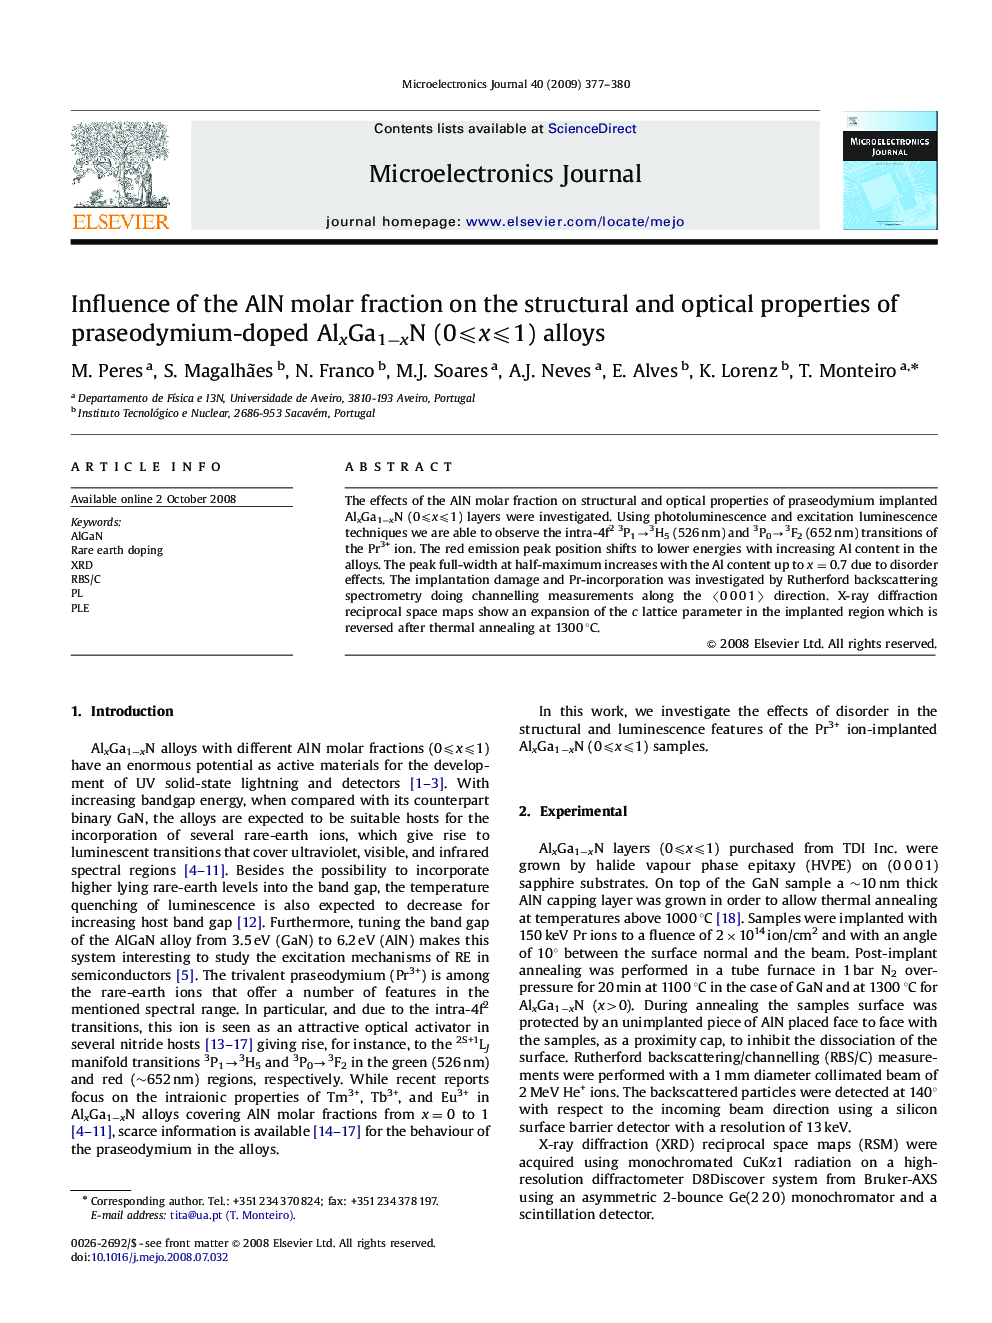 Influence of the AlN molar fraction on the structural and optical properties of praseodymium-doped AlxGa1−xN (0⩽x⩽1) alloys